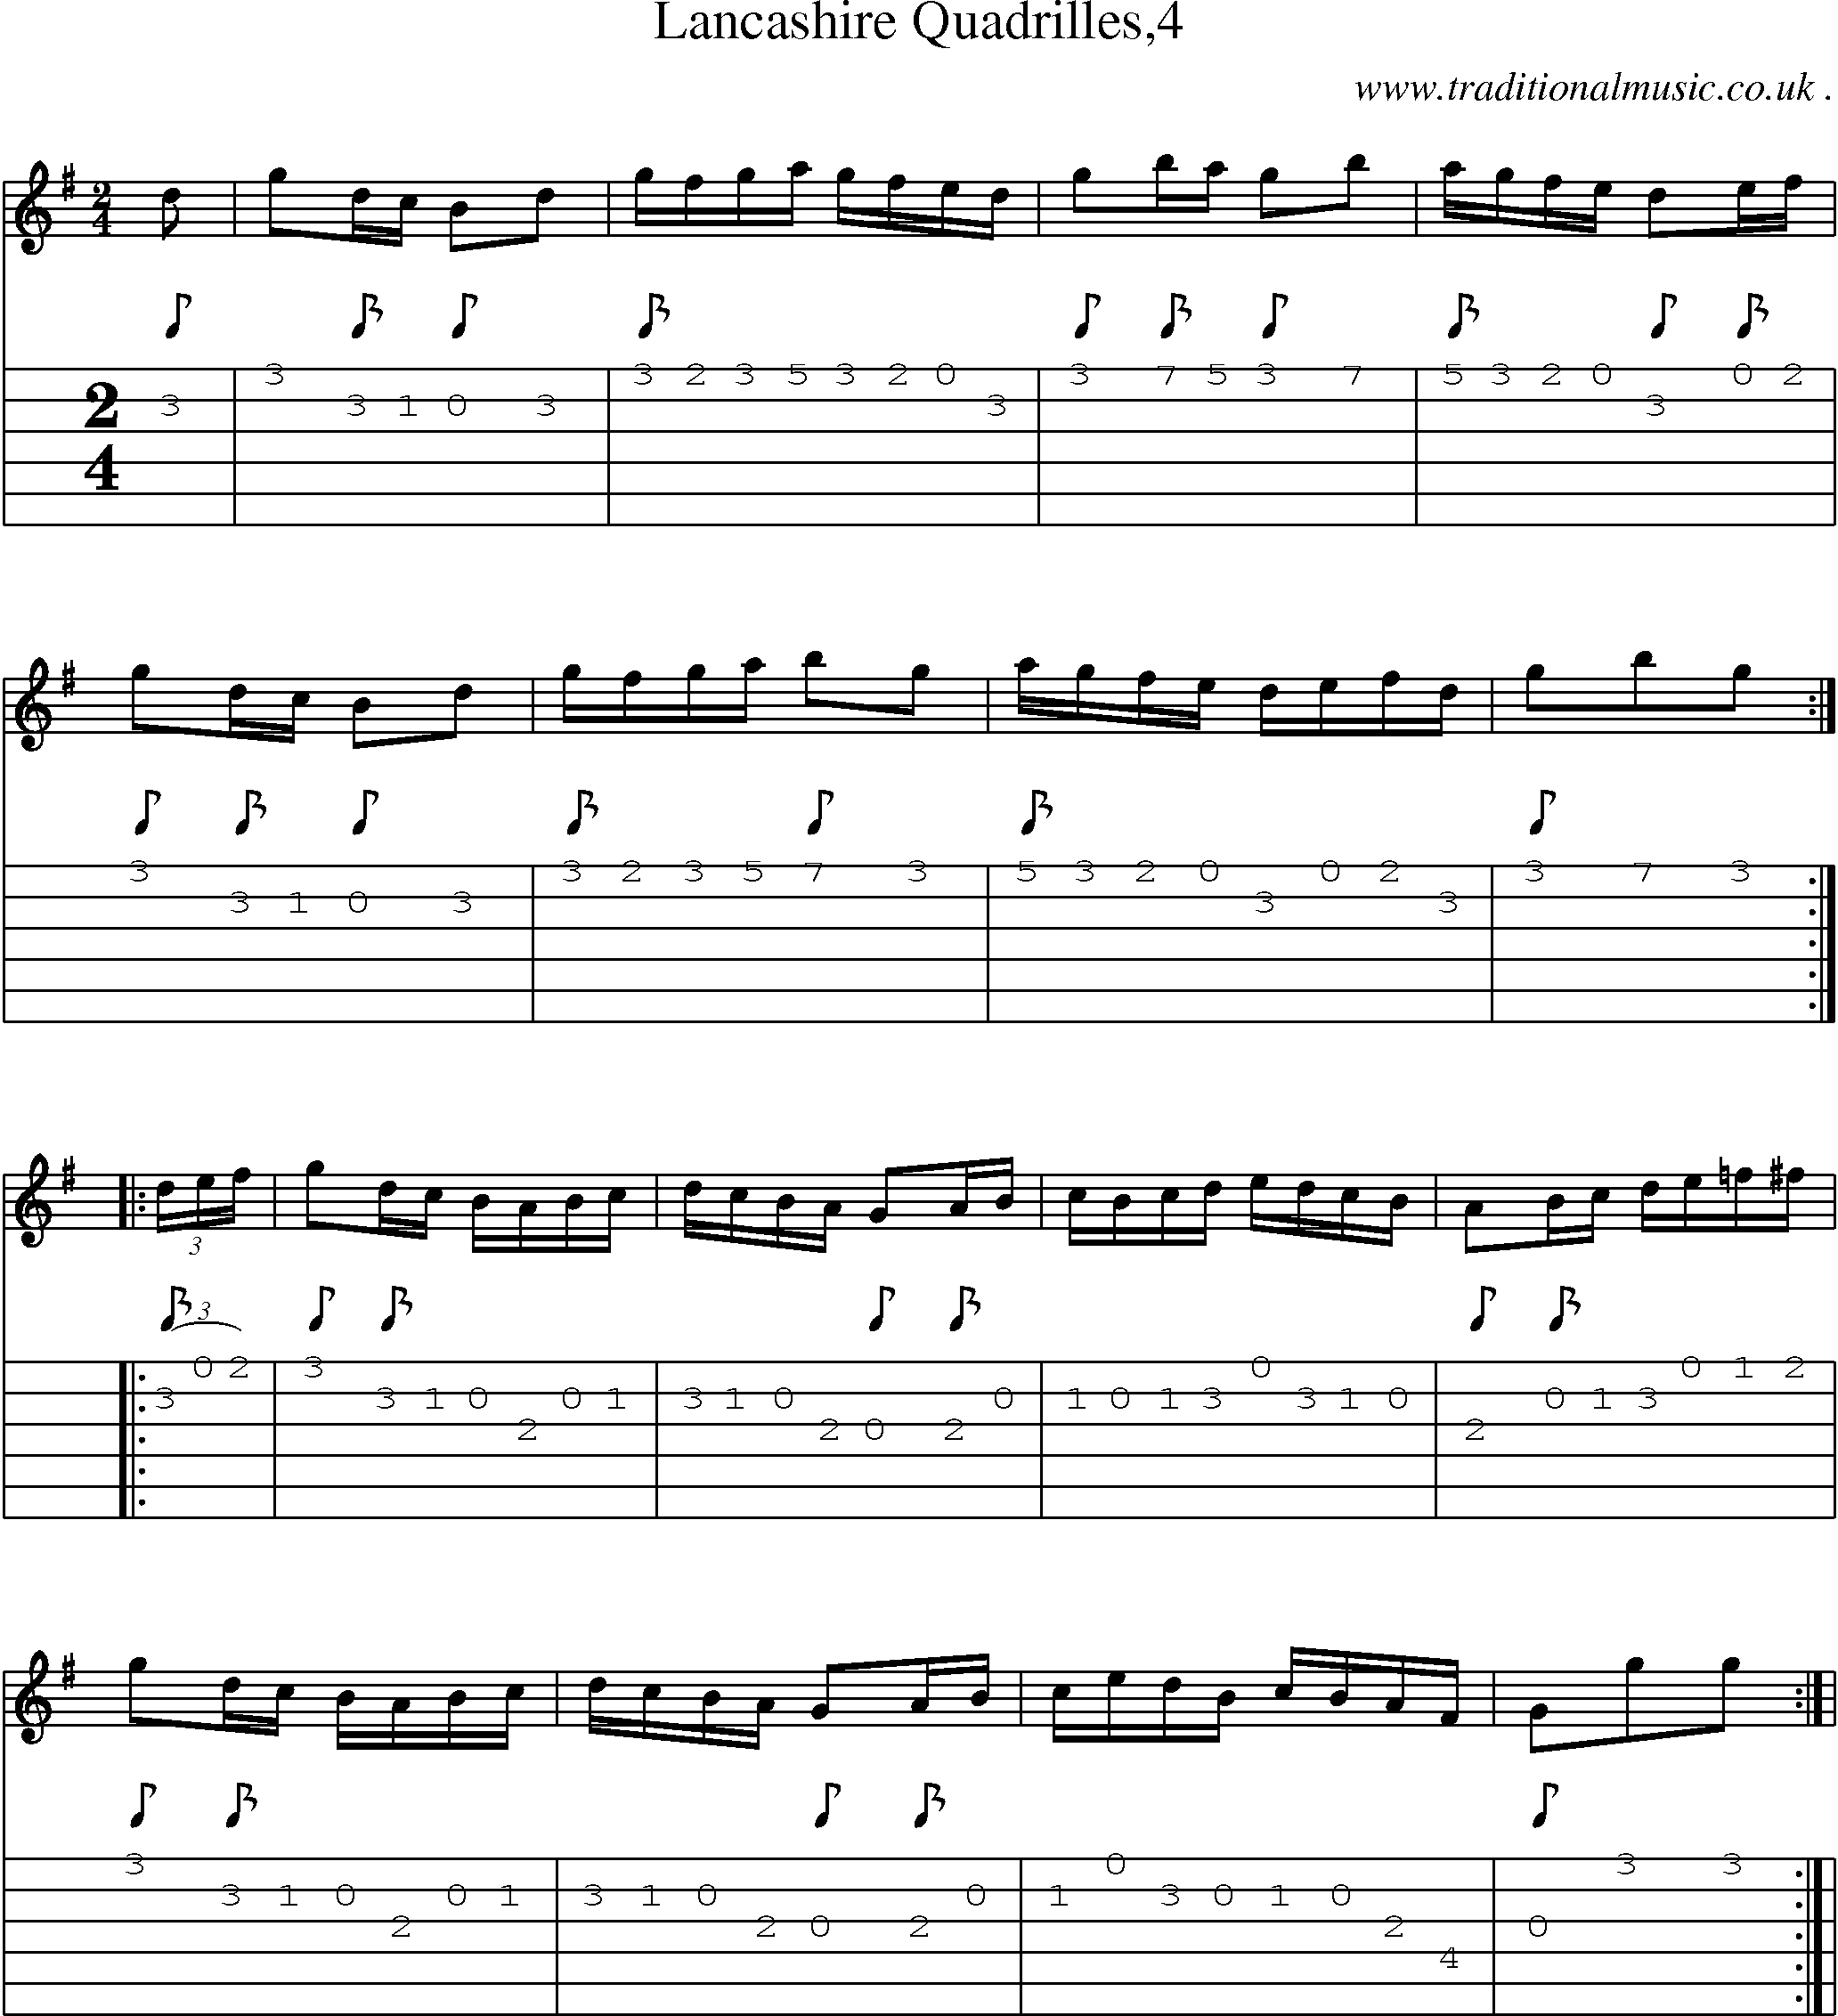 Sheet-Music and Guitar Tabs for Lancashire Quadrilles4